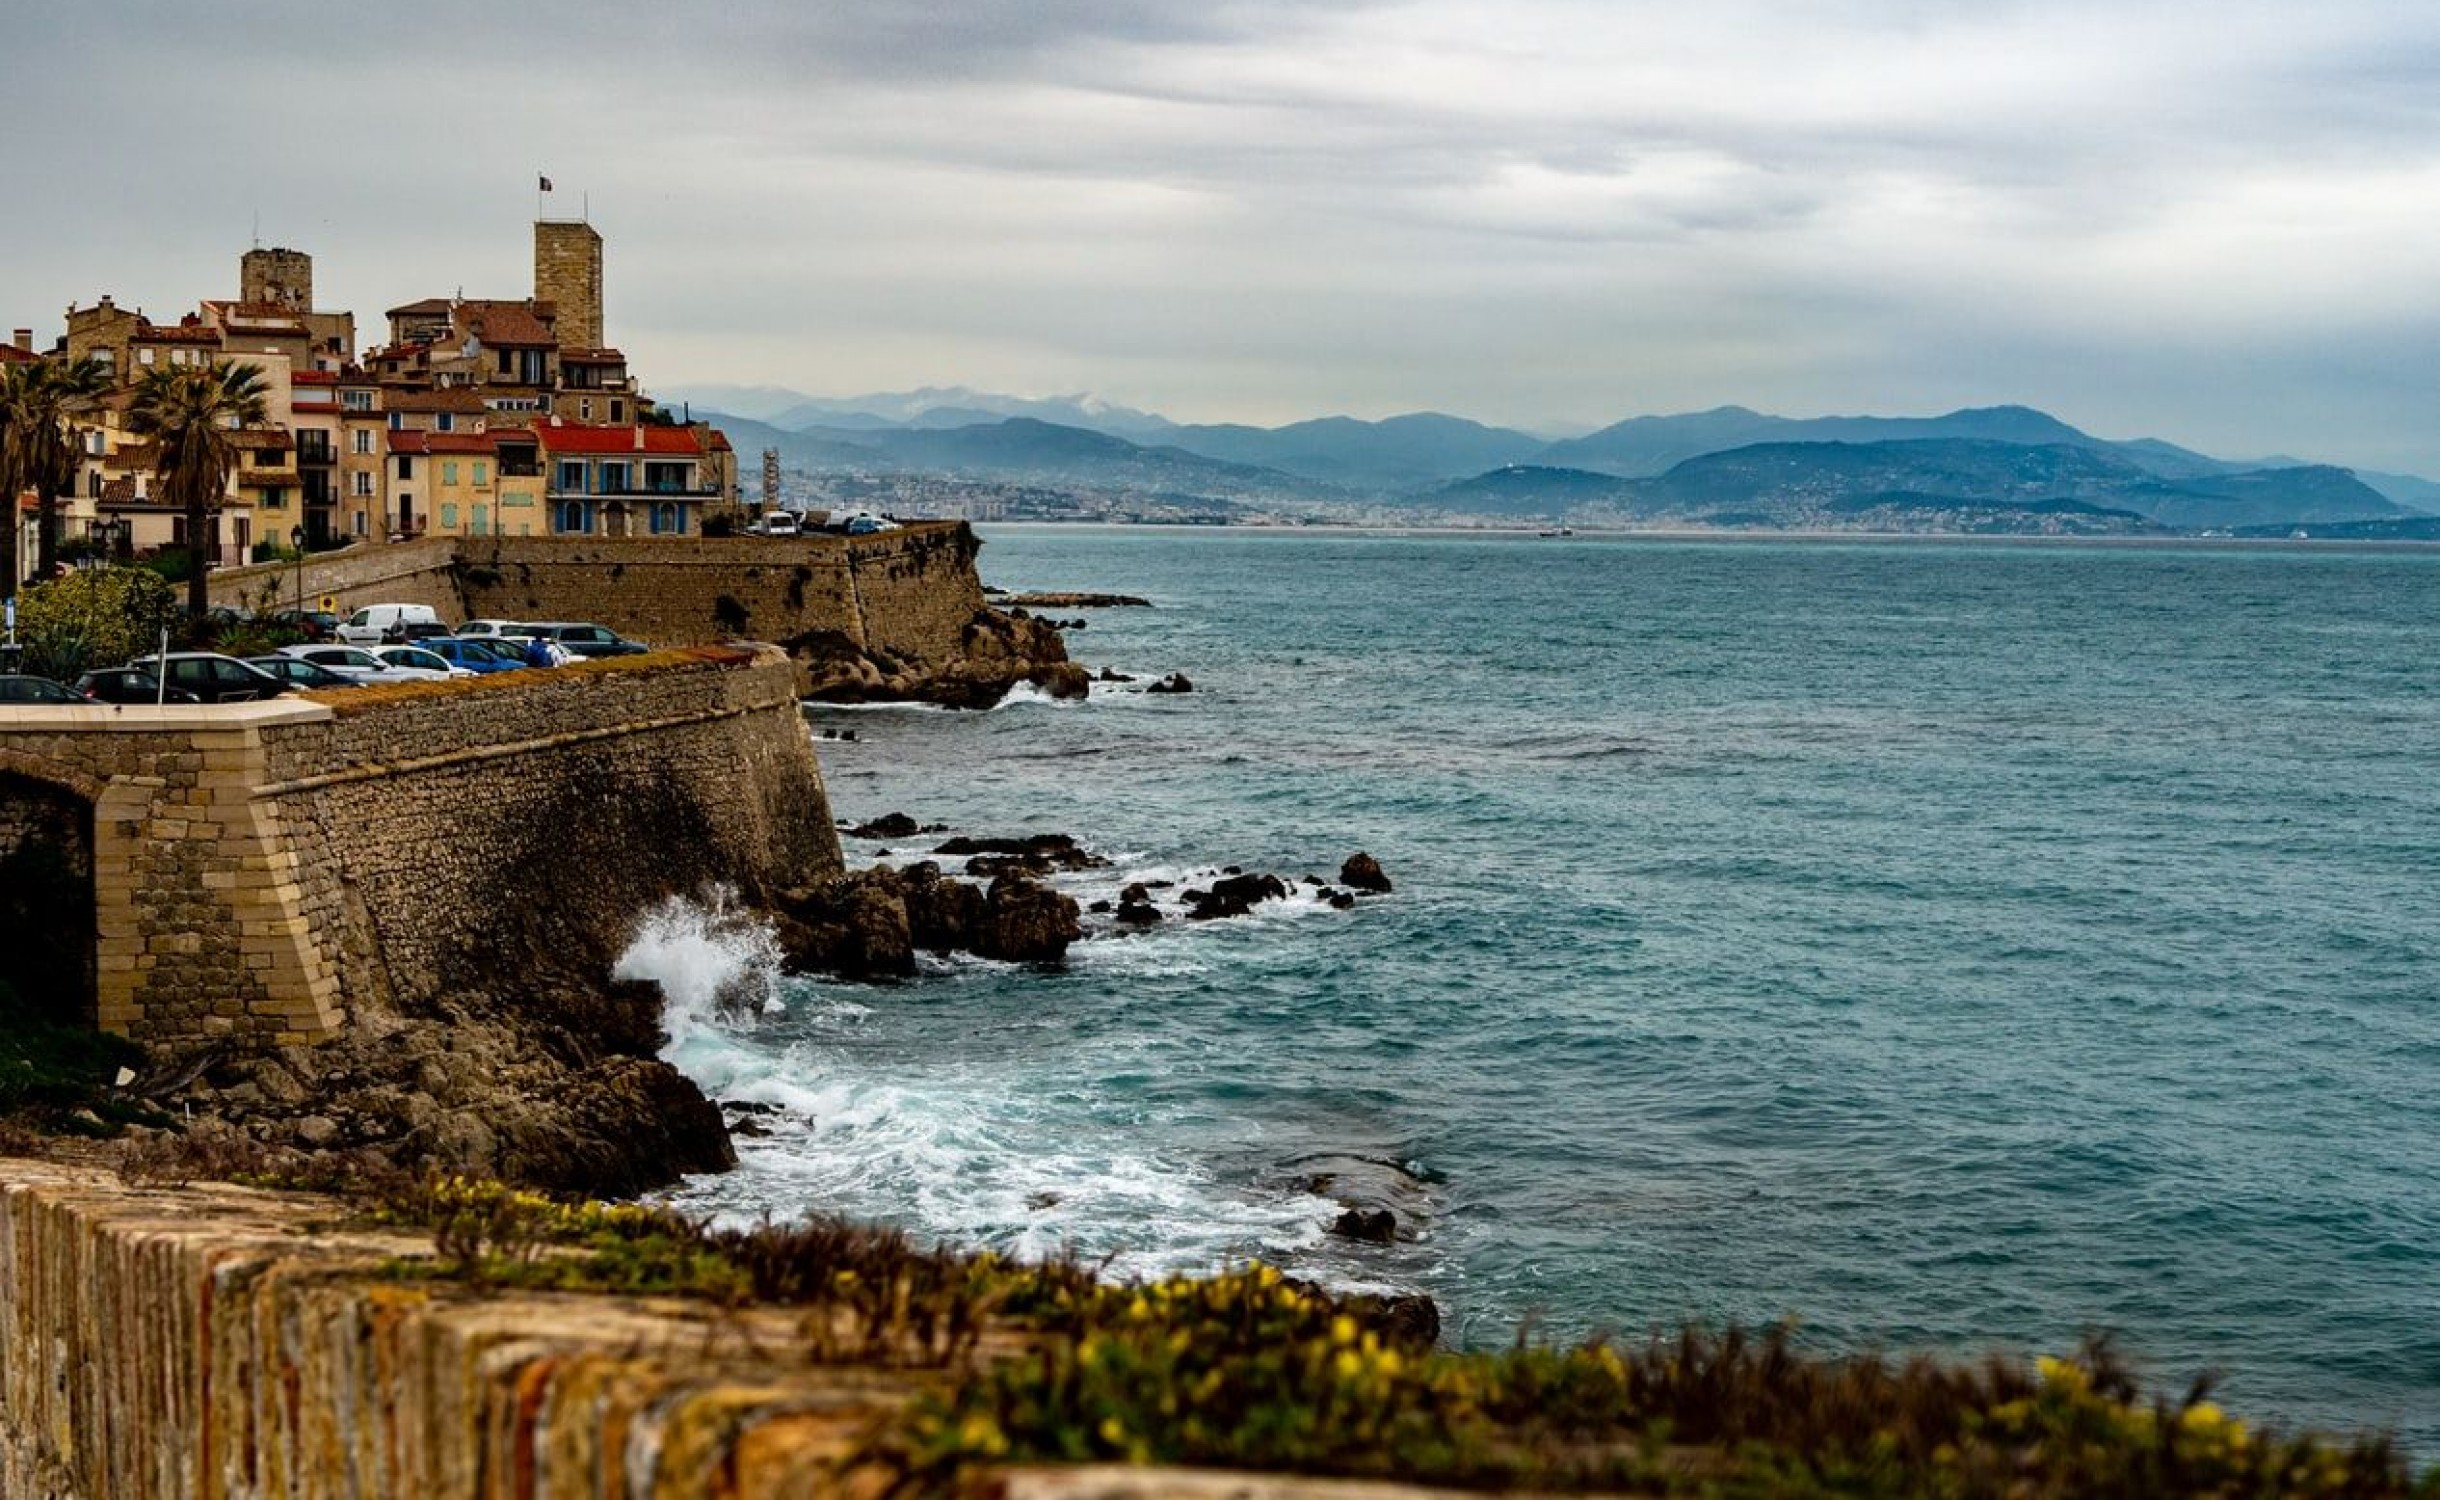  Car service in Antibes: a ride to remember